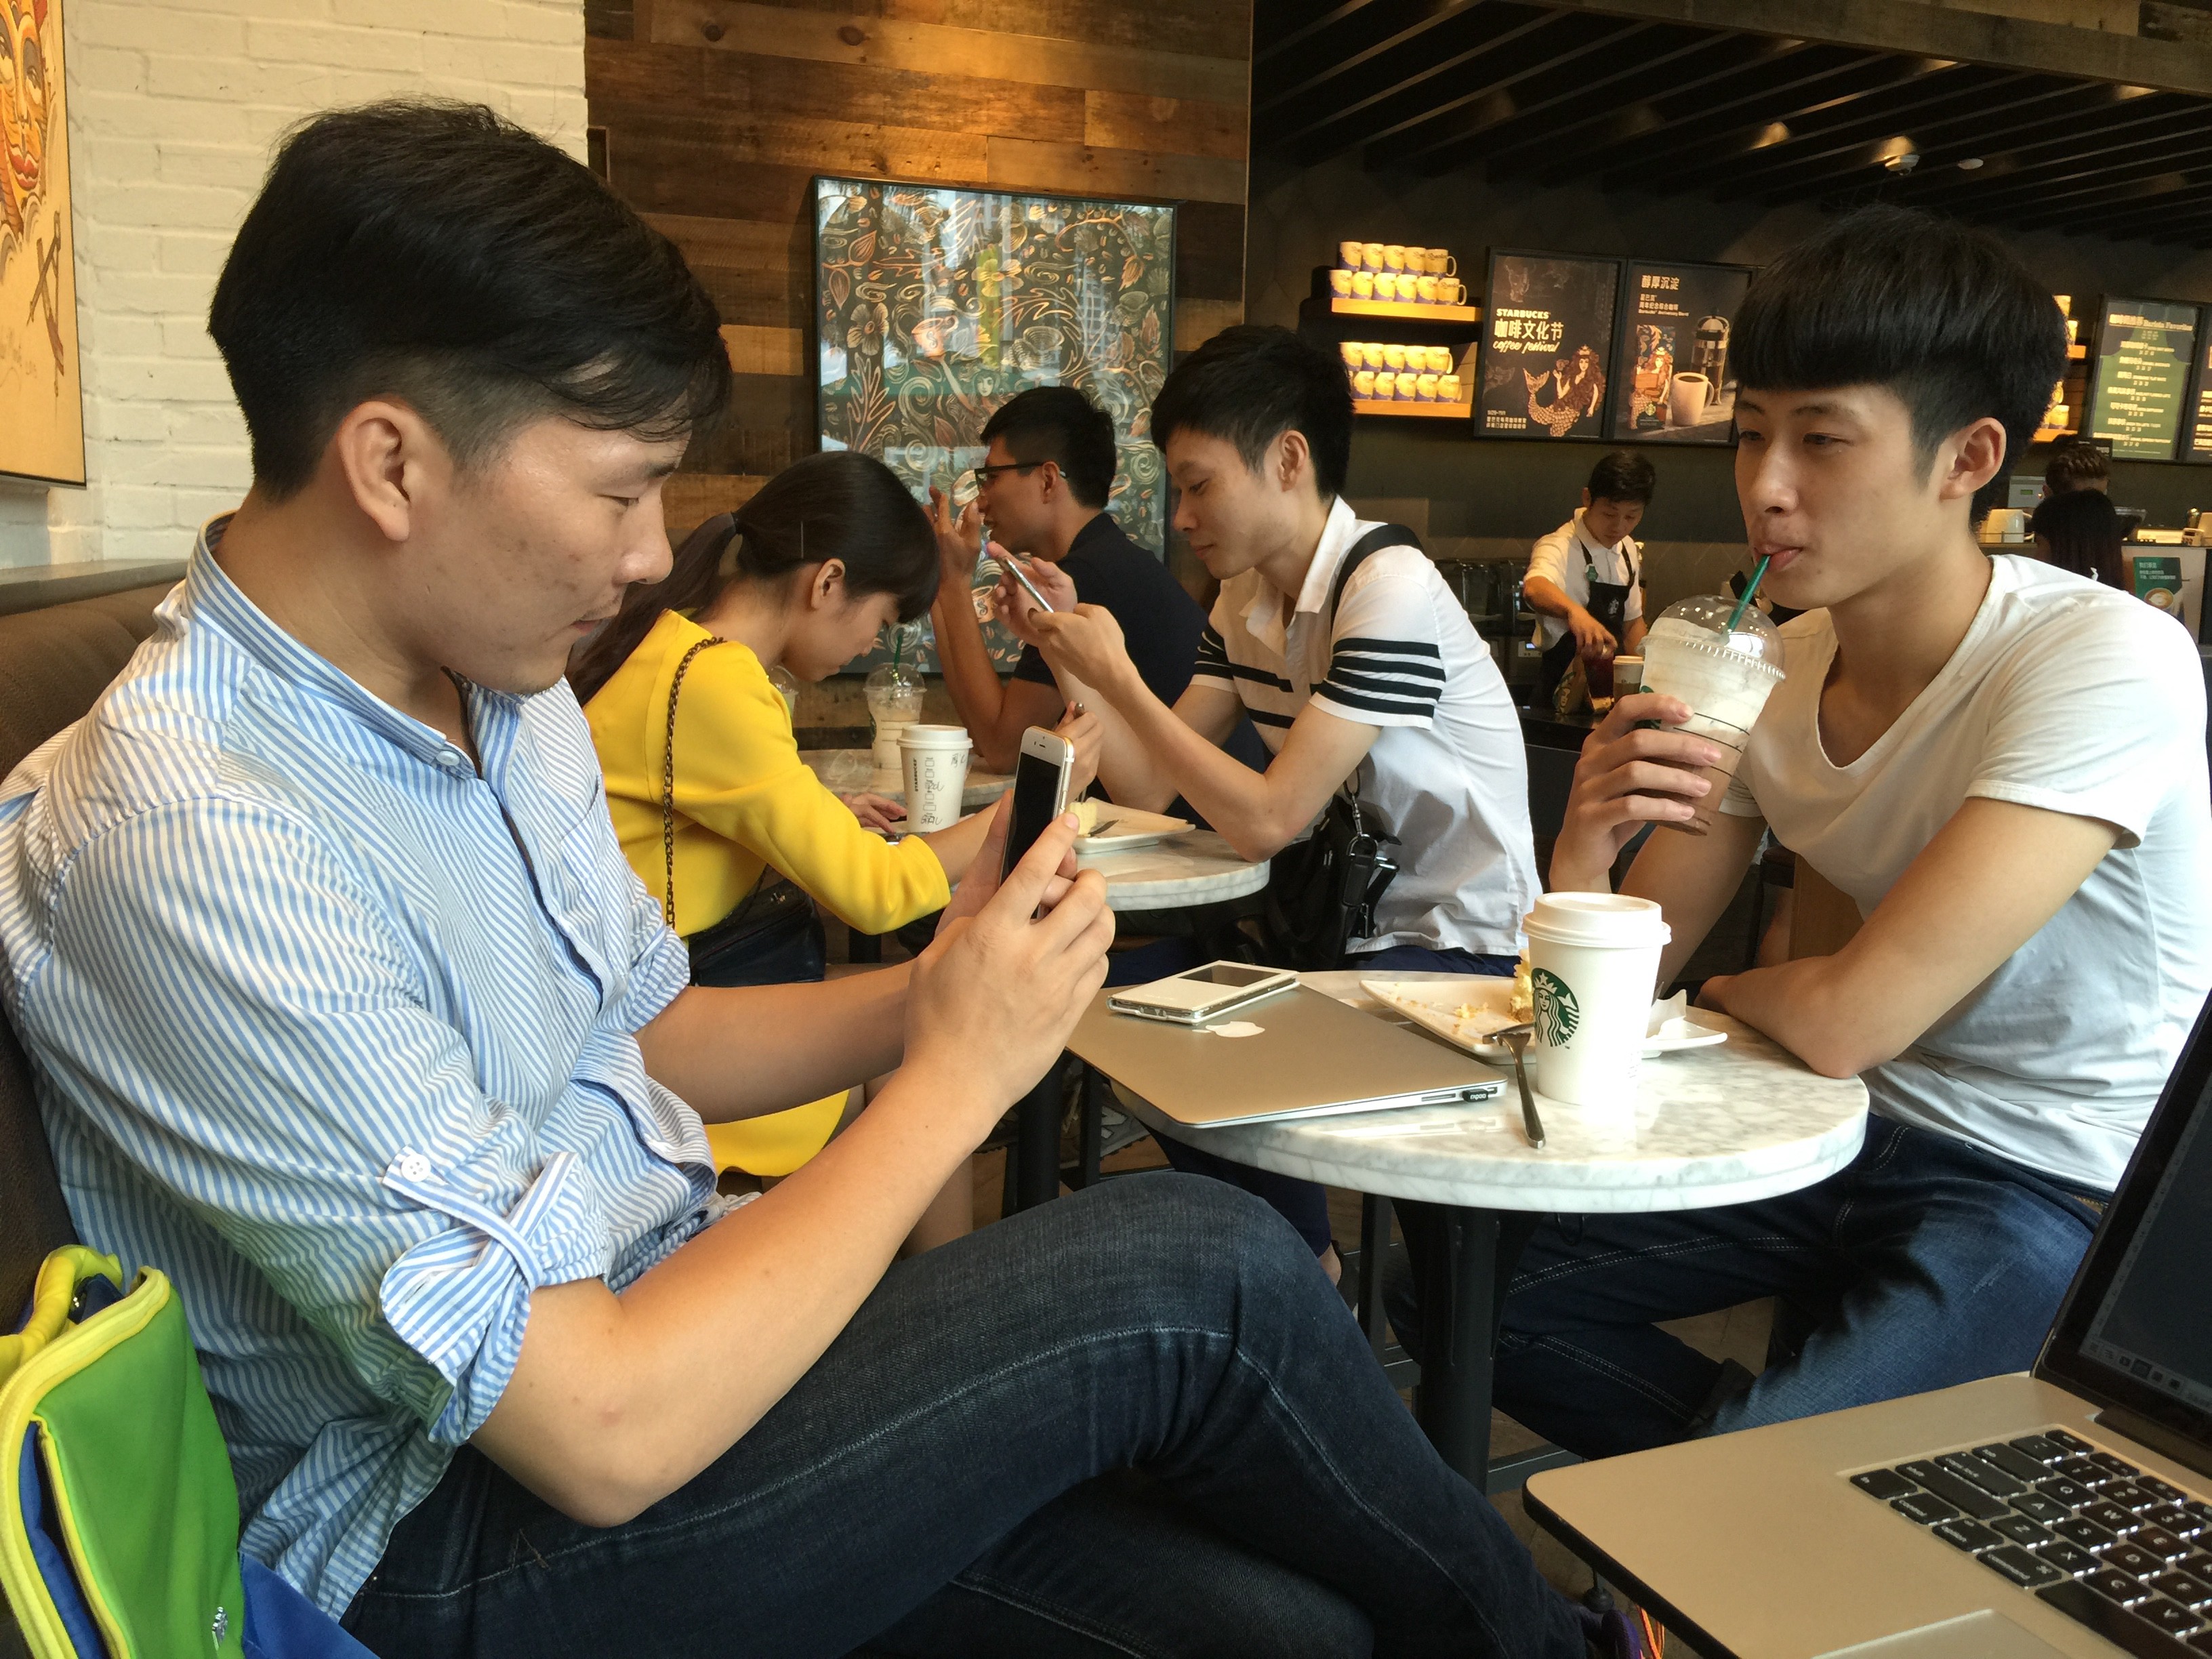 Cai Xiaodong, seated on the left, takes a photo of his friend at Starbucks. Photo: Wency Lin